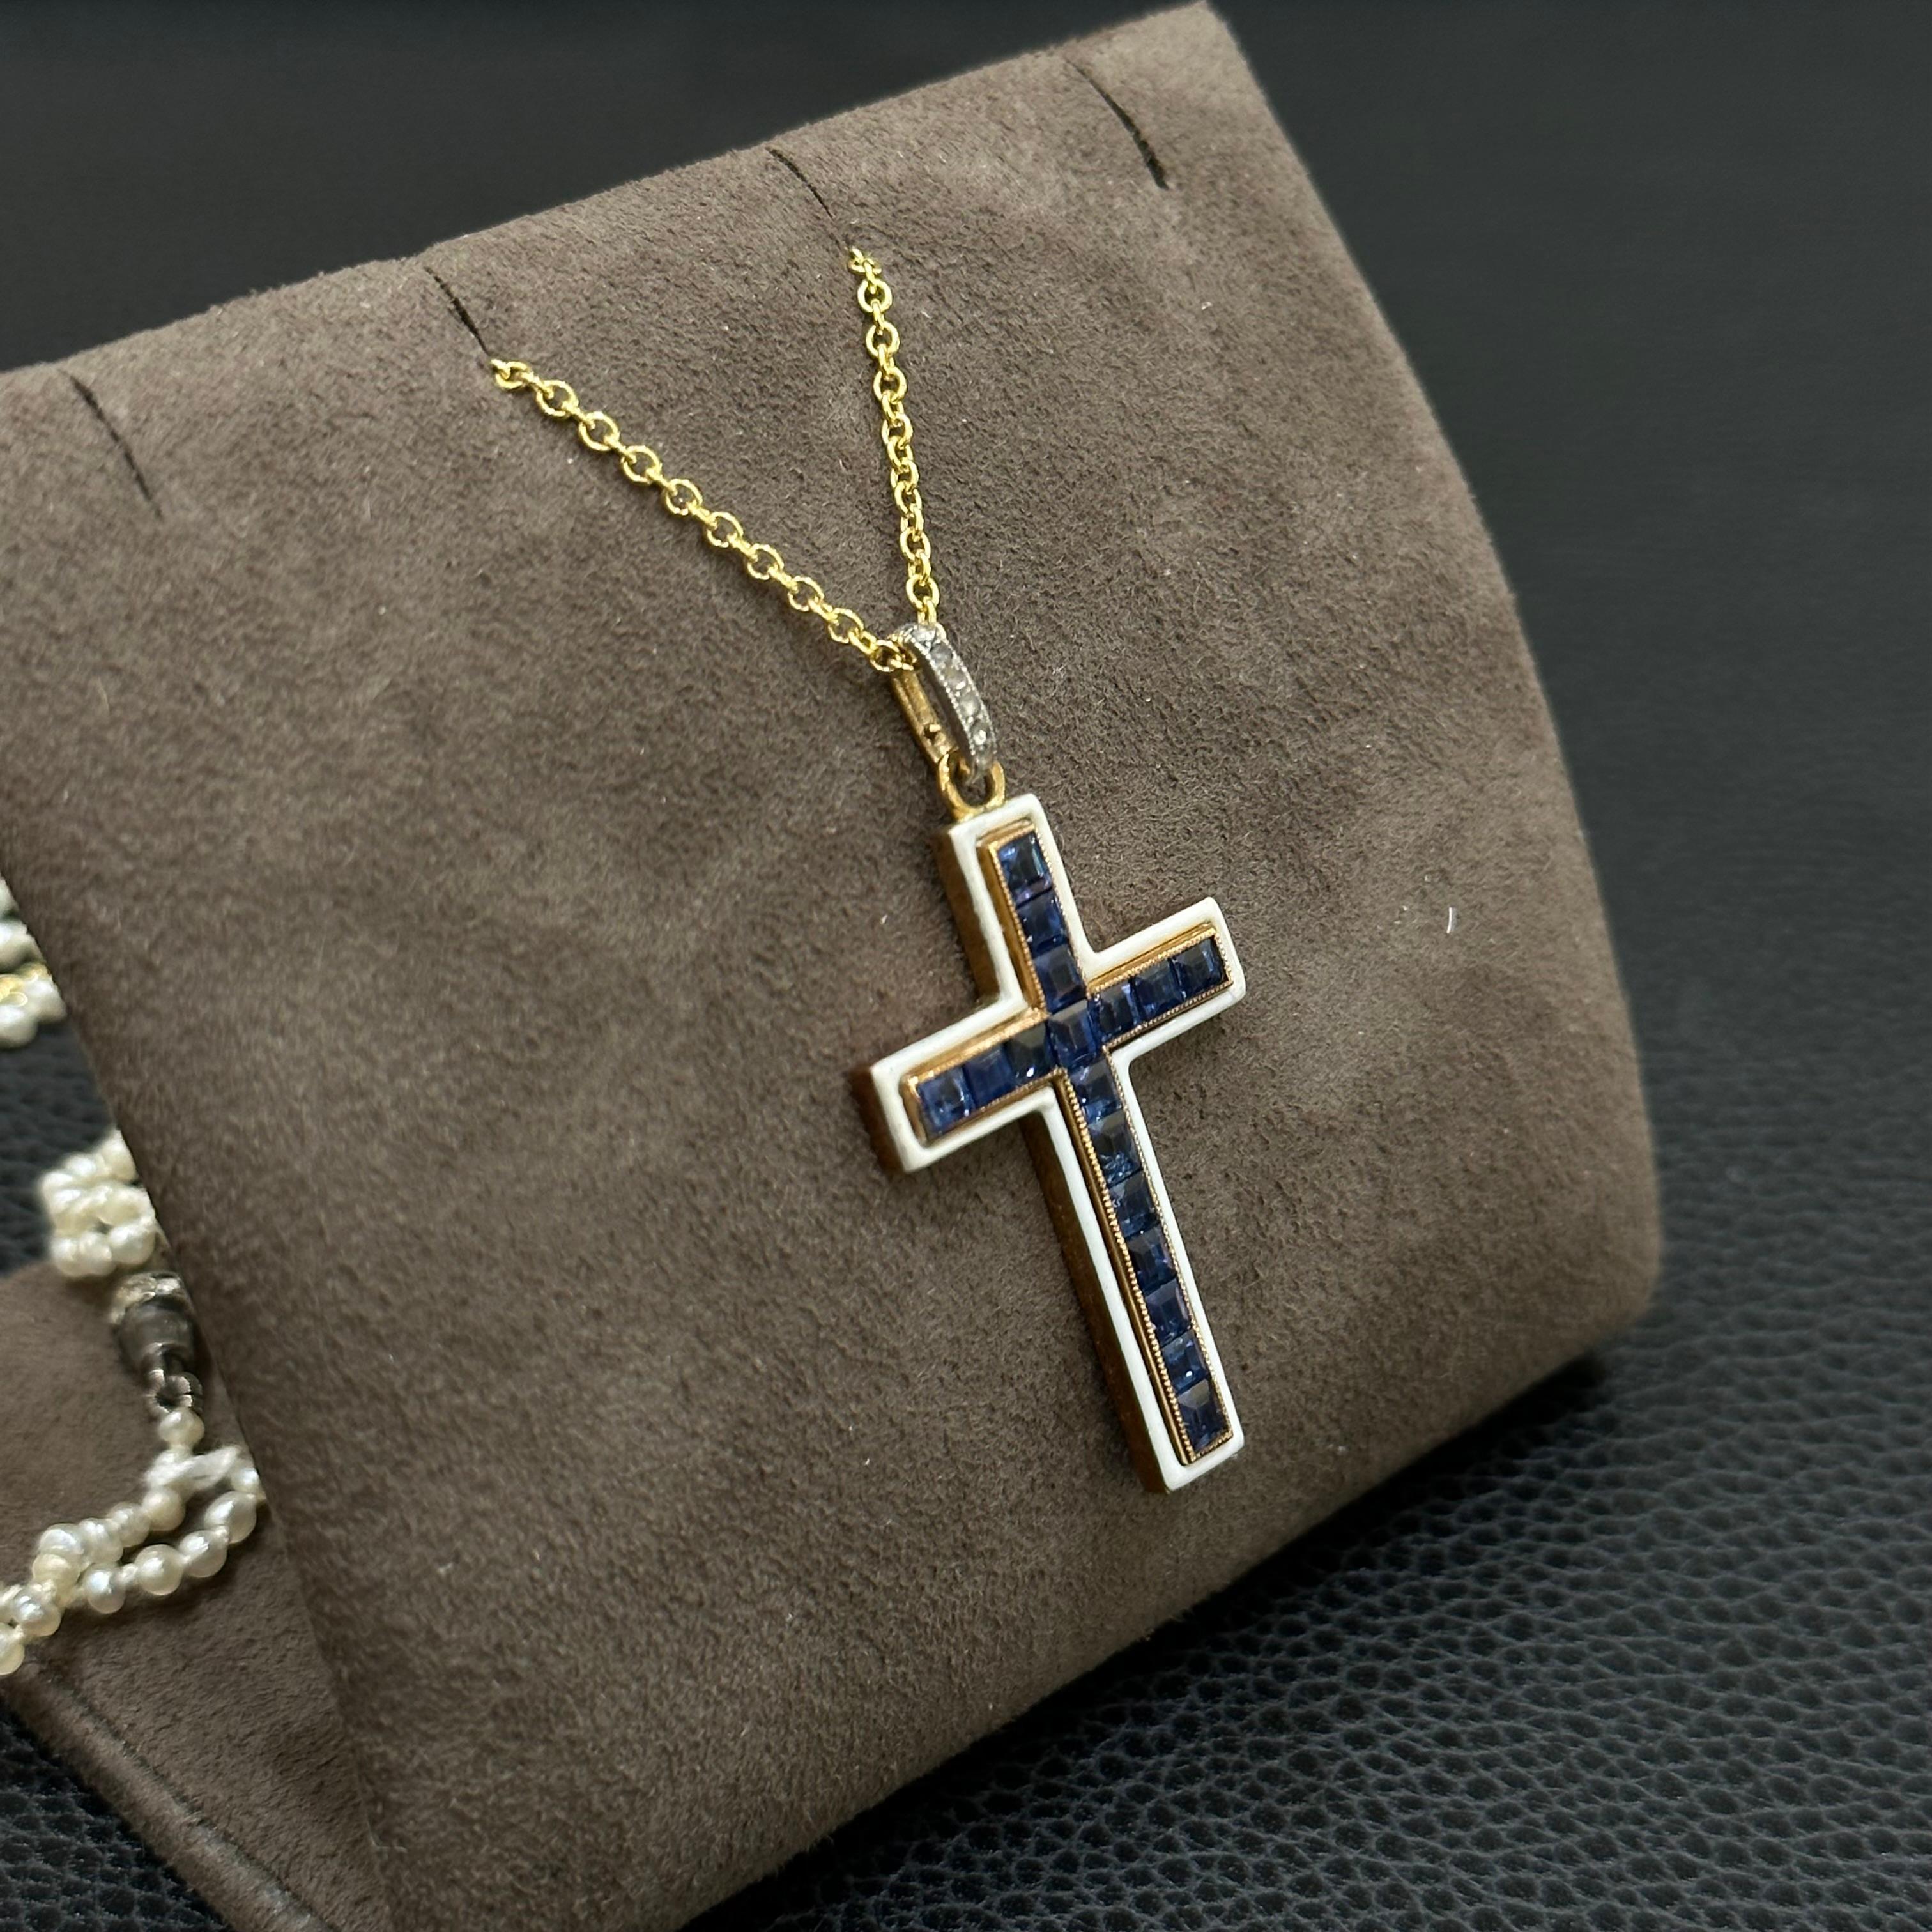 18K Yellow Gold, Sapphire and White Enamel Cross by LaCloche Freres, Paris ca. 1900. Comes with a Yellow Gold 1.5mm Cable Link Chain 18